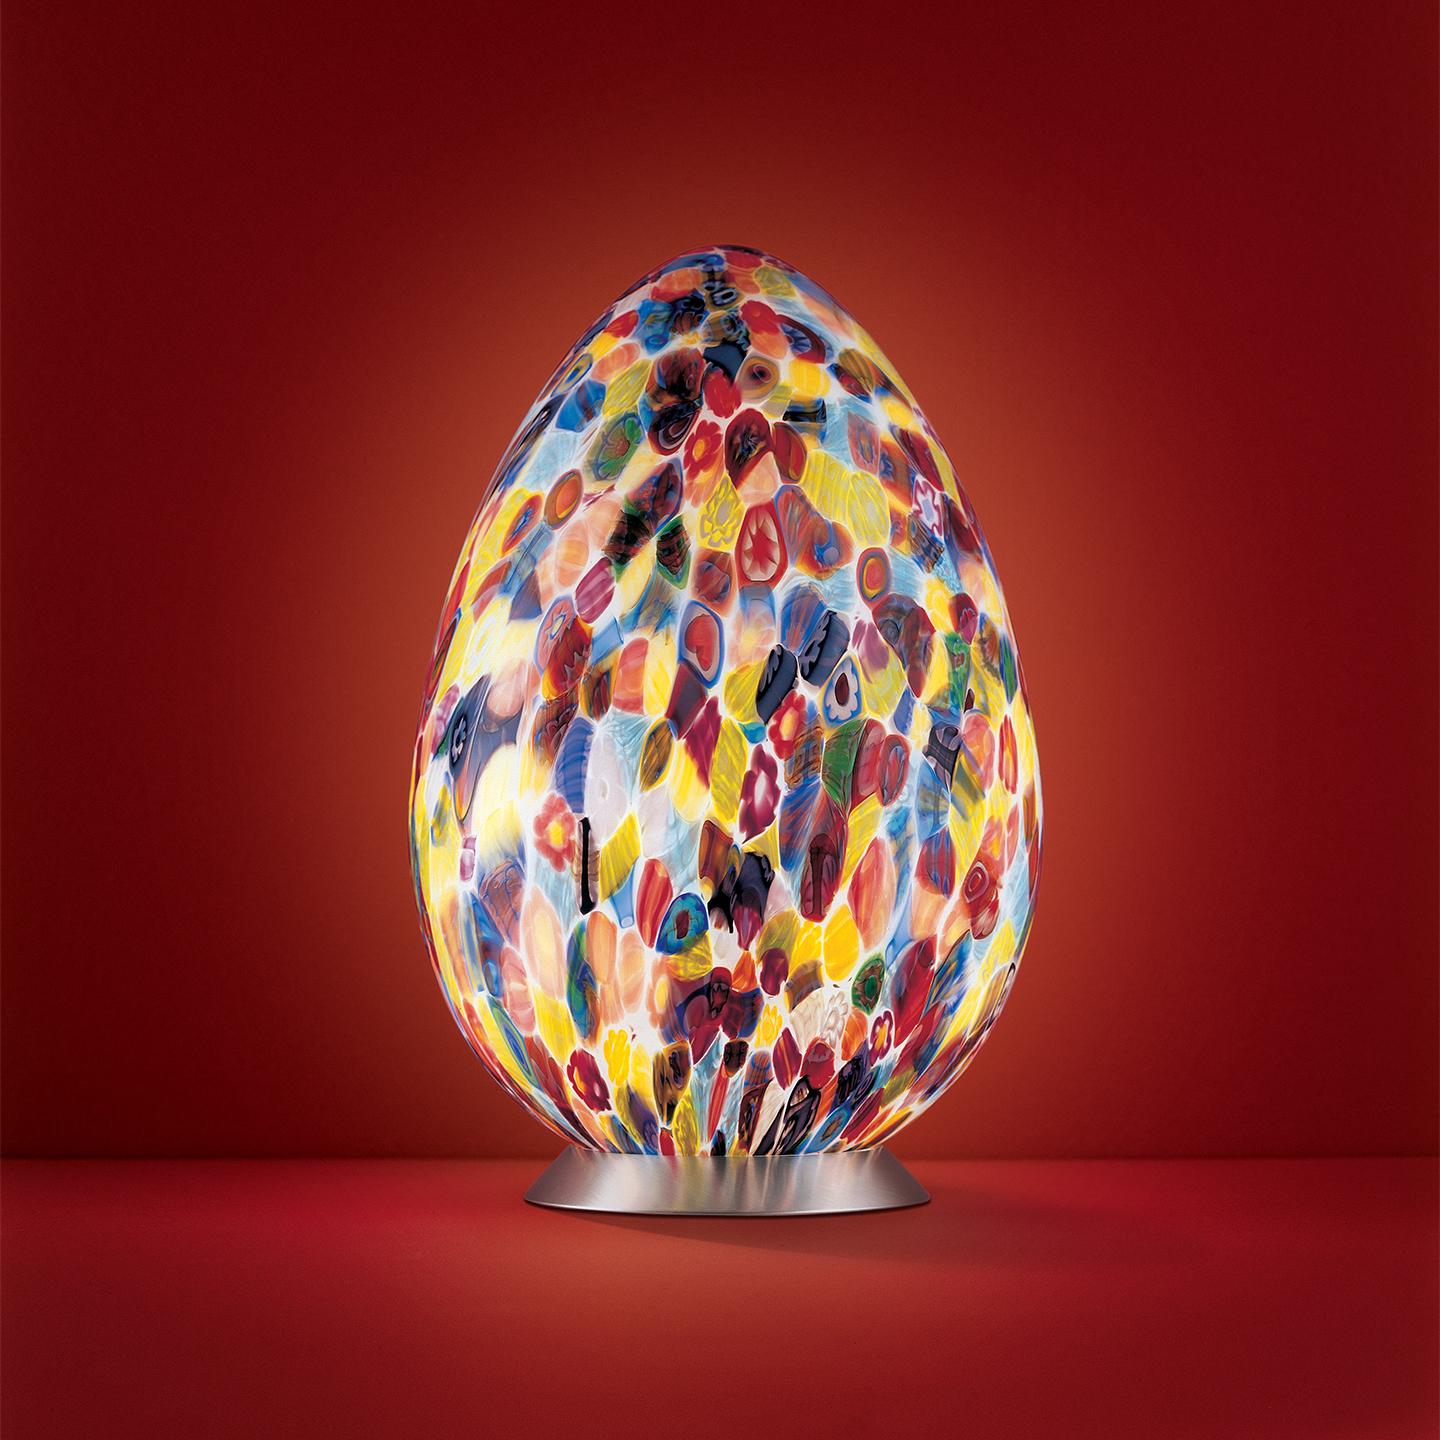 The Uovo Table Lamp brings the time-honored Murano glass technique of murrine to your home from a fresh, contemporary perspective. Murrine was developed 4,000 years ago and was revived by the Venetian glassmakers in the 16th century. It is